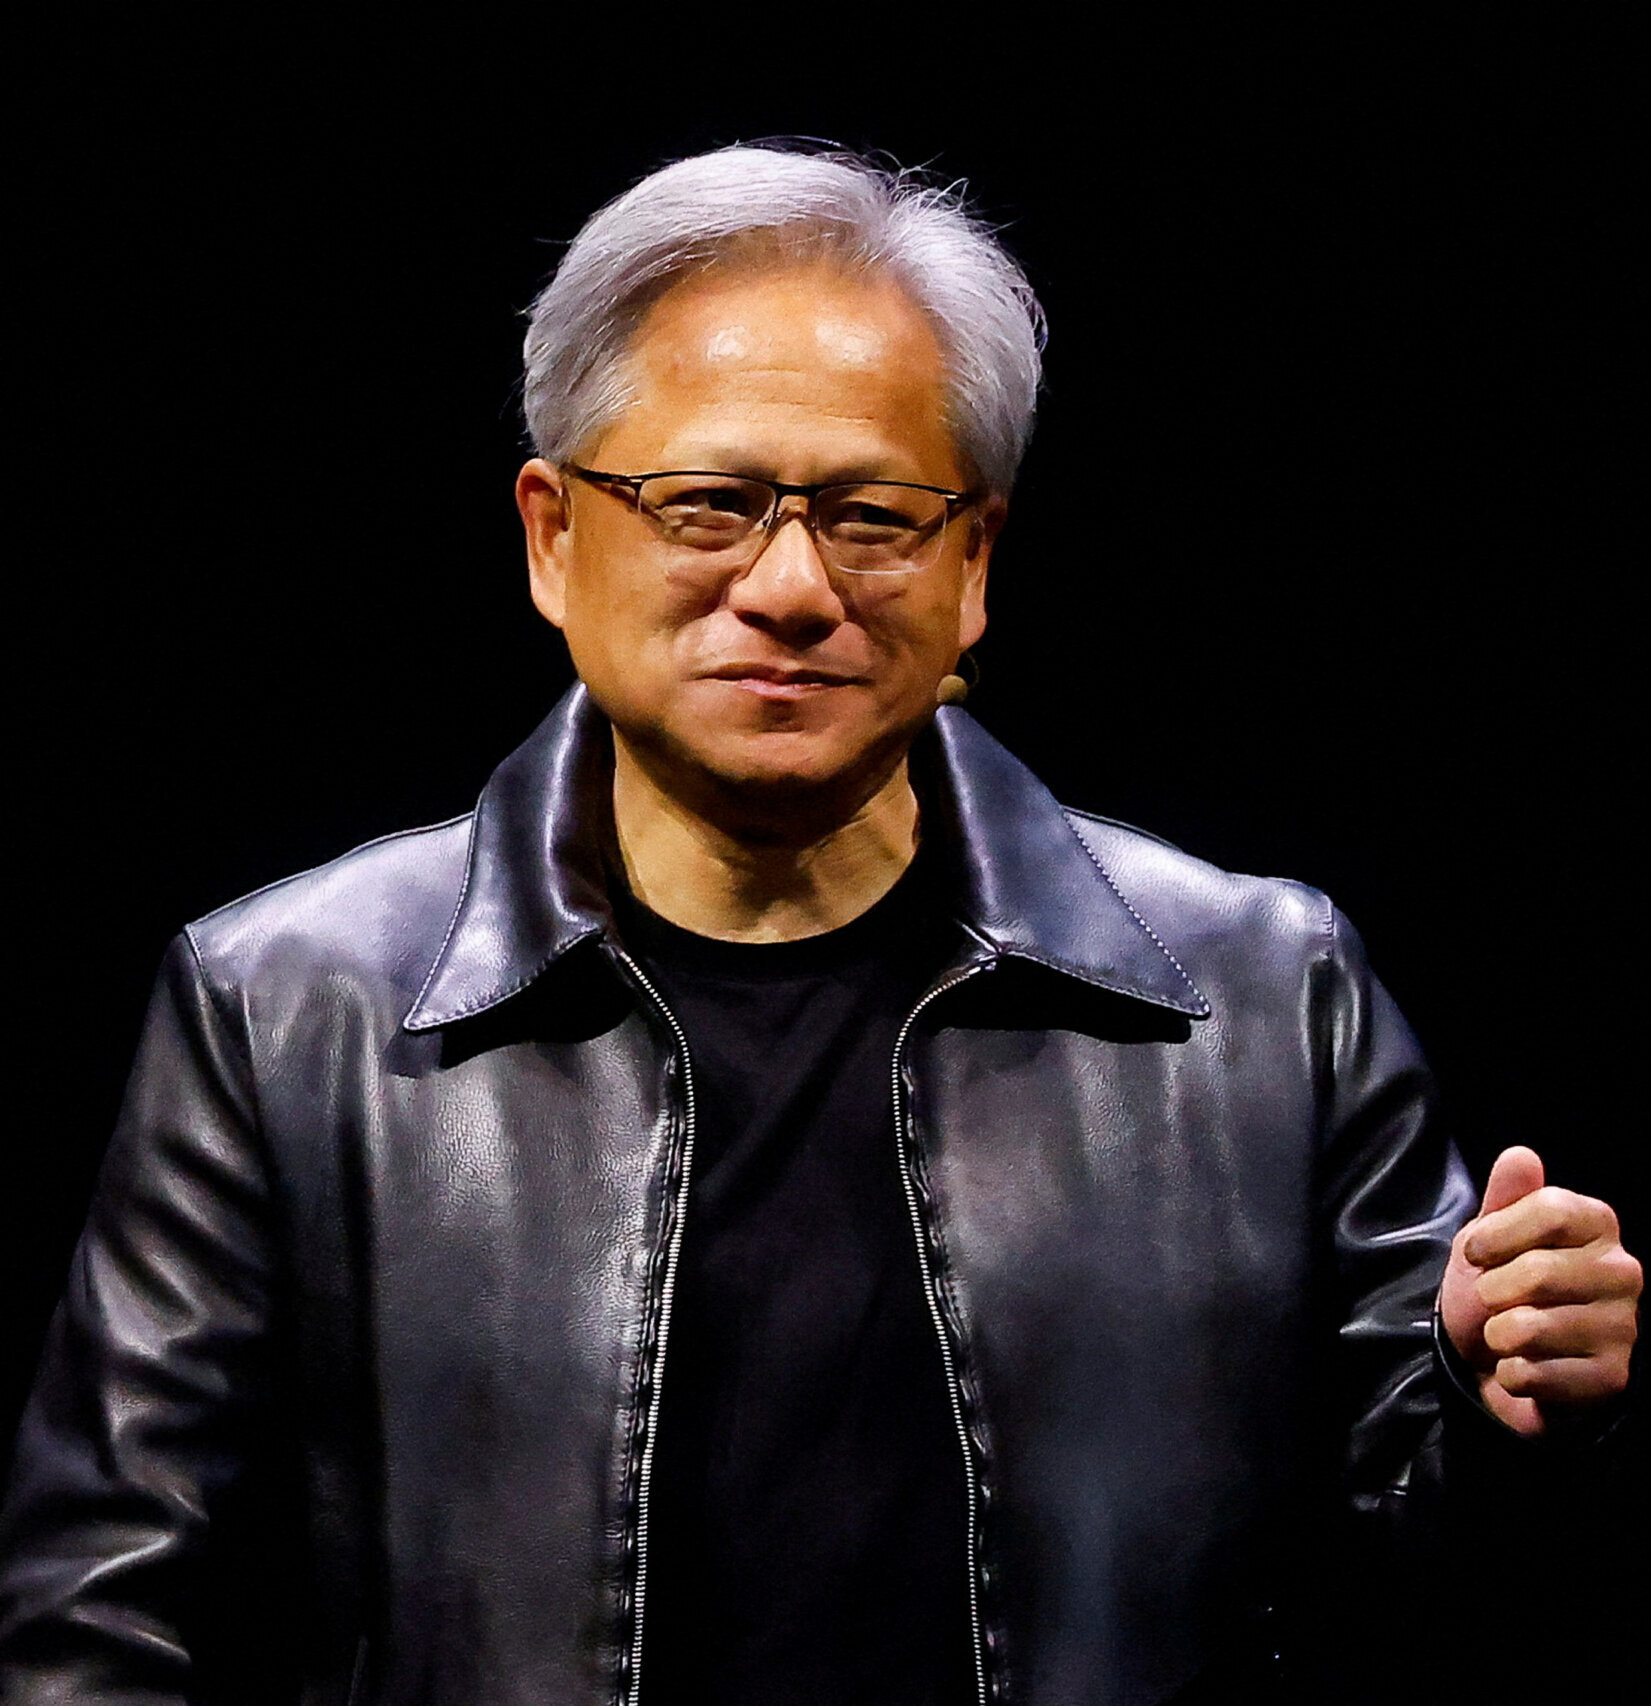 Nvidia Corp Ceo Jensen Huang Speaks At The Computex Forum In Taipei